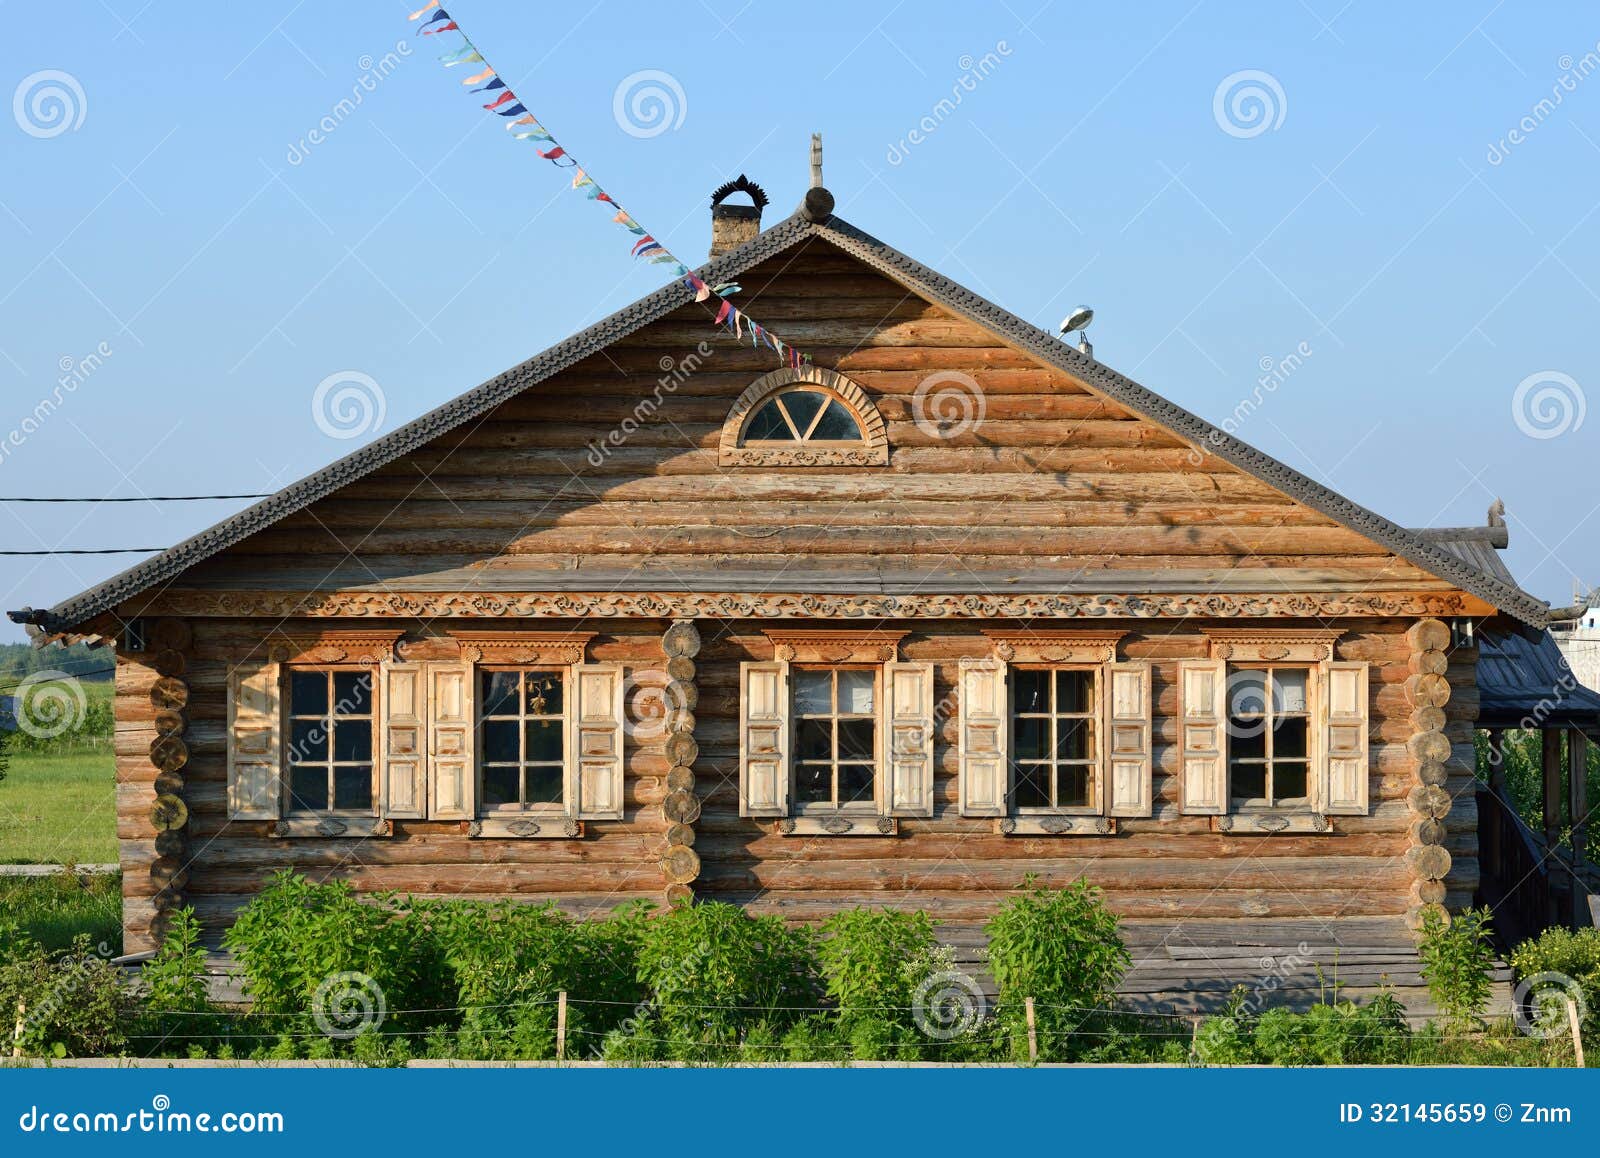 Russian House Royalty Free Stock Images - Image: 32145659